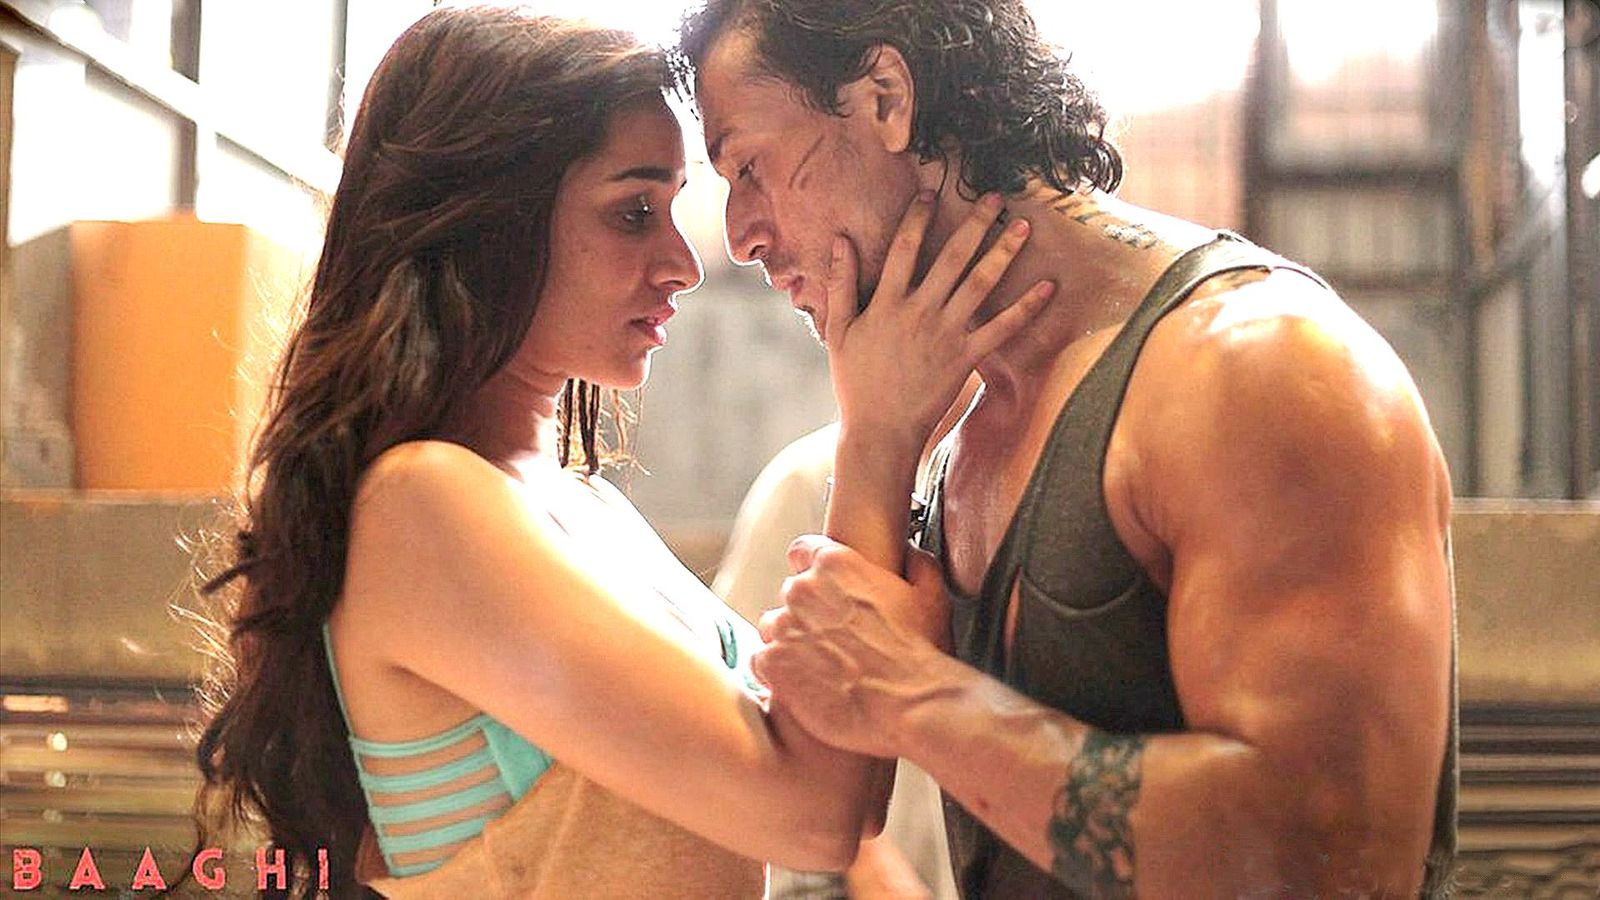 Baaghi Earns A Staggering Rs. 38.58 Crore In The First Weekend!